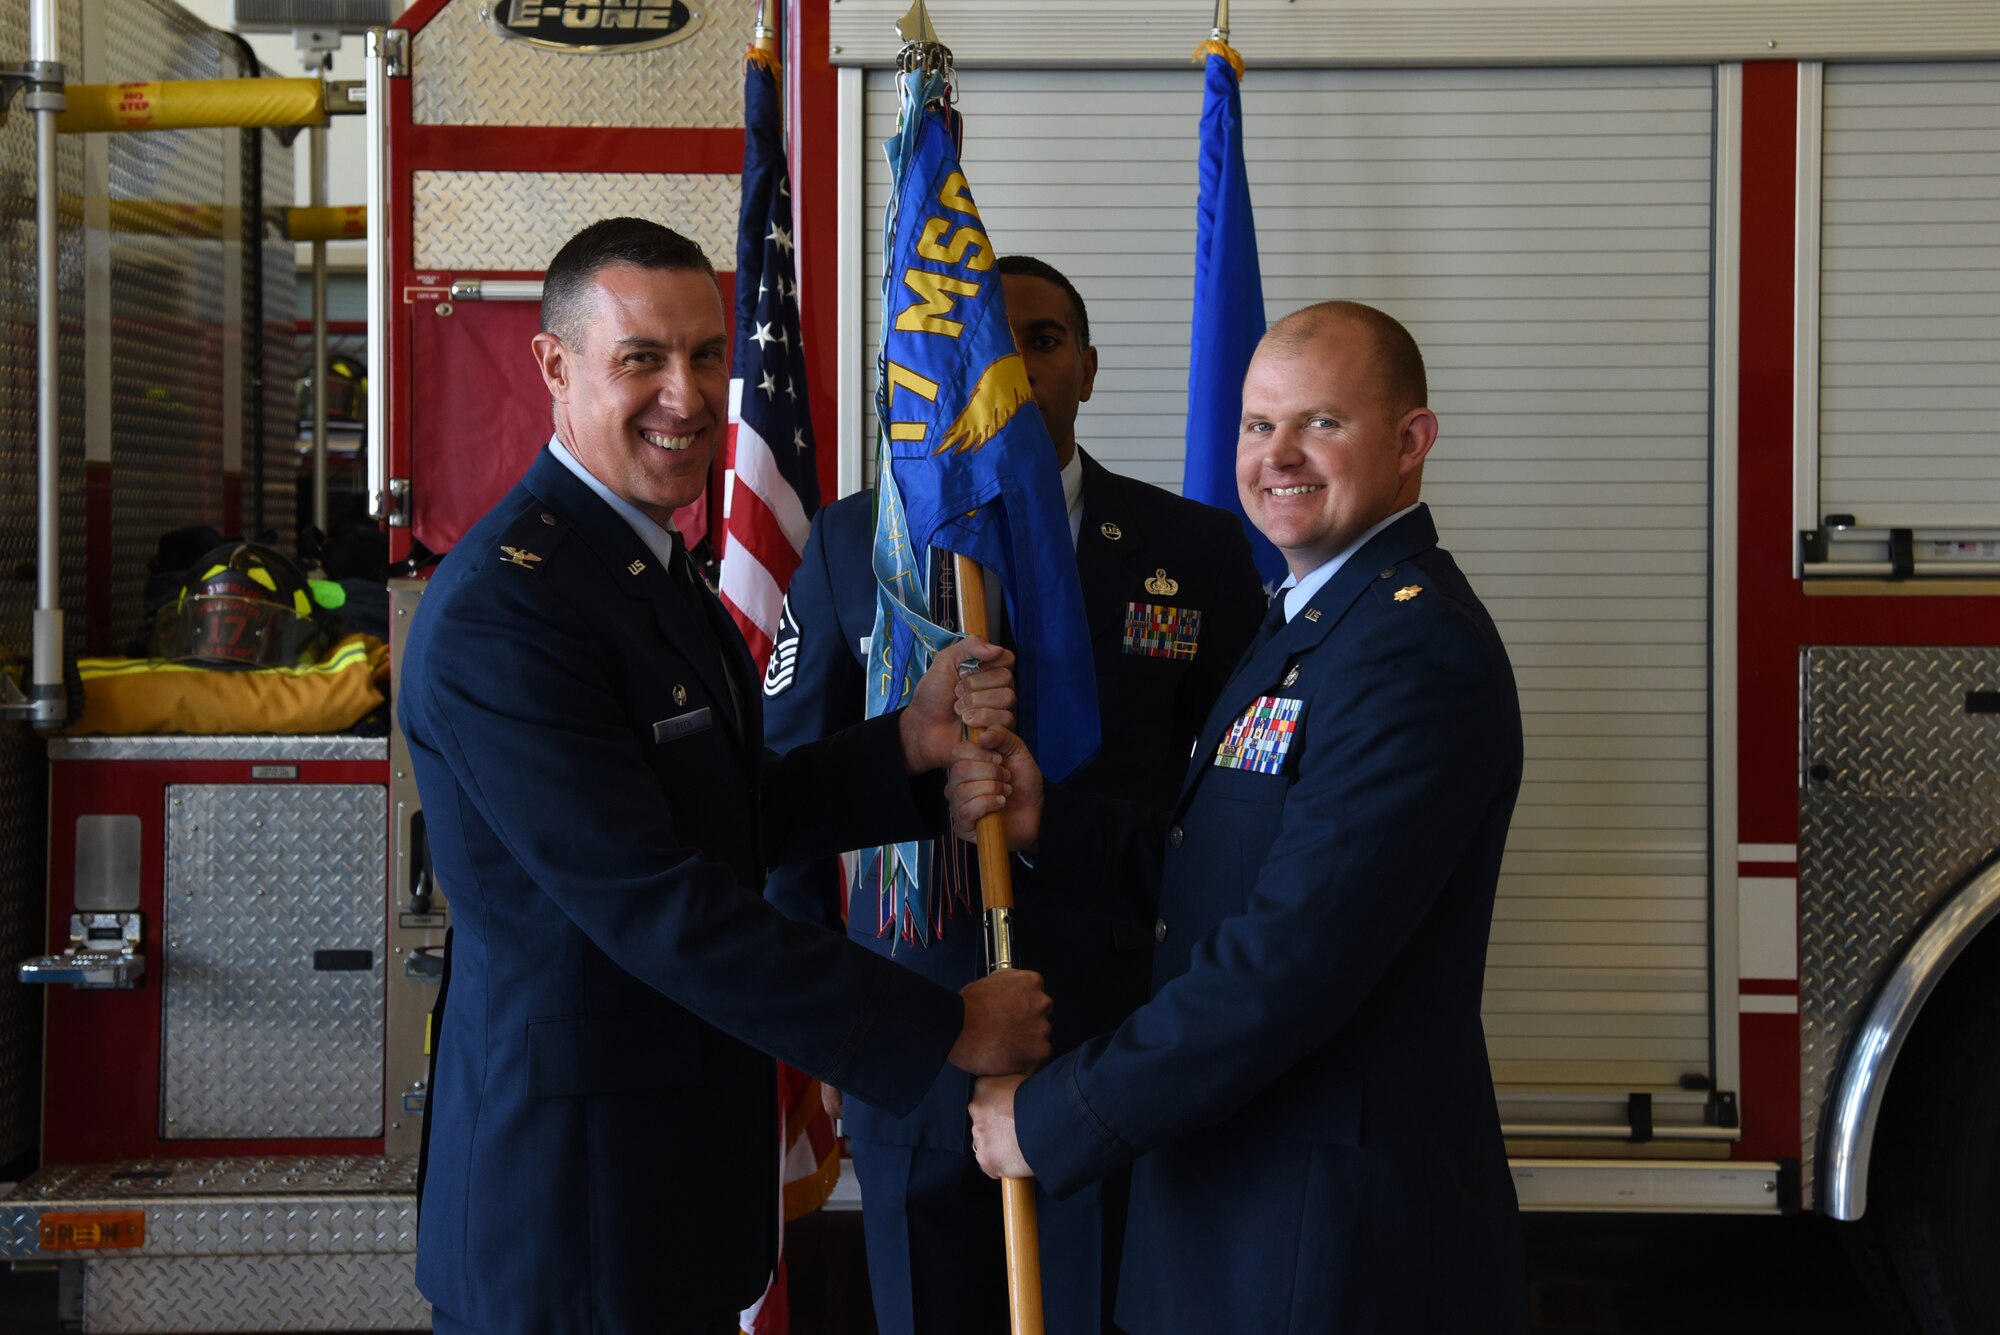 U.S. Air Force Col. Jason Beck, 17th Mission Support Group commander, passes the 17th Civil Engineer Squadron guideon to Maj. Nicholas Anderson, 17th CES commander, during the 17th CES Assumption of Command at the fire department on Goodfellow Air Force Base, Texas, June 22, 2018. As the 17th CES commander, Anderson is responsible for providing for the facilities, infrastructure and services on the base. (U.S. Air Force photo by Staff Sgt. Joshua Edwards/Released)